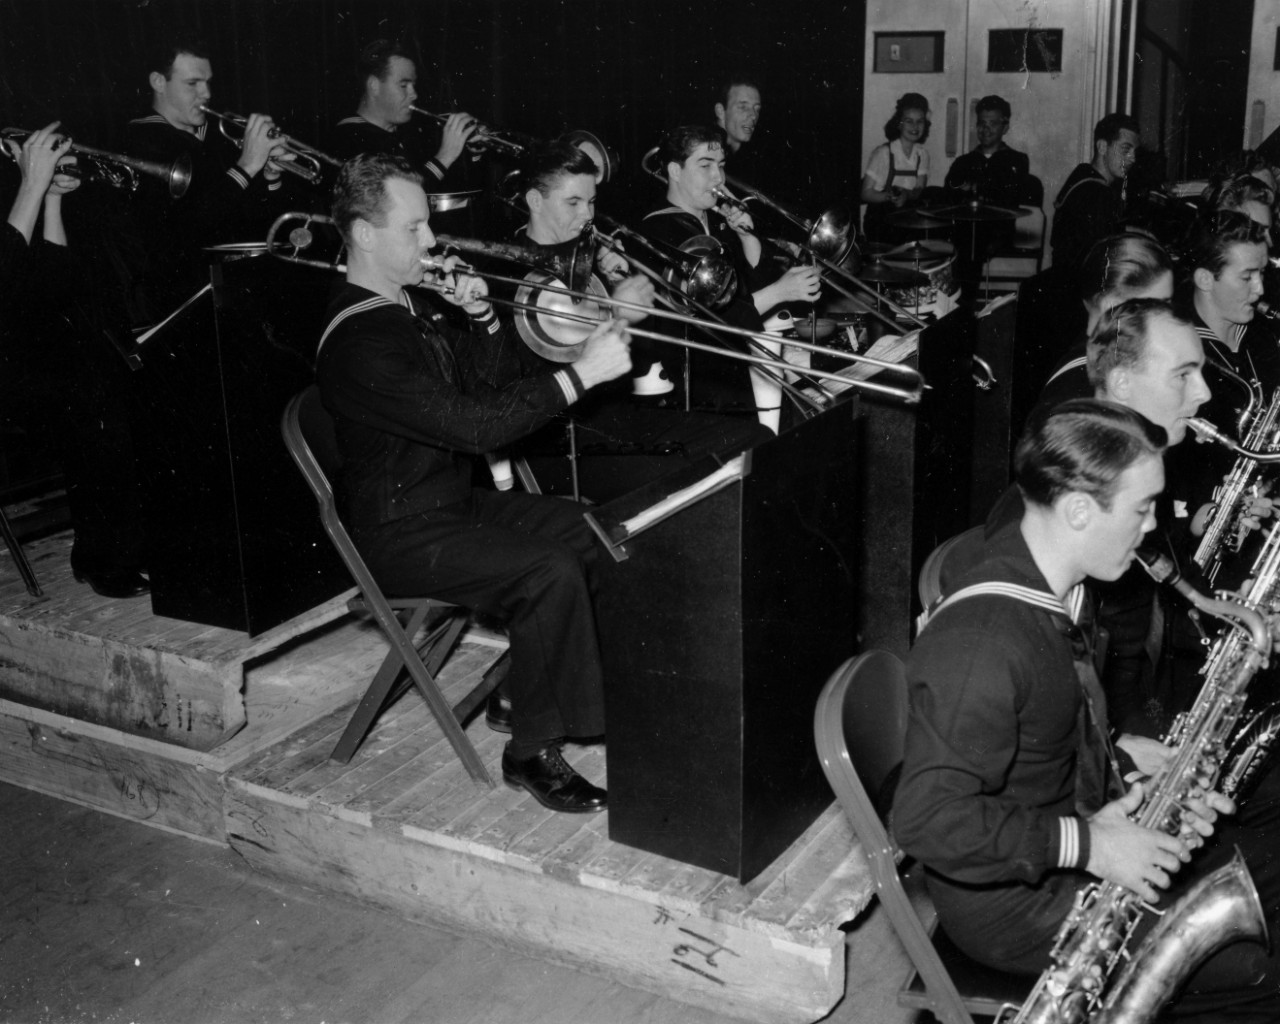 Collection of 18 photographs related to John C. Hedigan, a US Navy musician (trumpeter) during WWII. The images consist of Hedigan in uniform with rates up through Muscian, 1c, during the 1940s, plus some views in civilian dress and in the uniform of an unidentified band. Also included are views of the Navy Band at Portland, ME, circa 1943-1945, with Hedigan in each photograph, as well as the Navy Band playing at the Bureau of Engraving dance in Washington, DC, 1942. Part of this collection also includes an oversized panoramic image of company 42-127, Naval Training Station San Diego, listed as S-515-A, of which Hedigan was a member in 1942. 